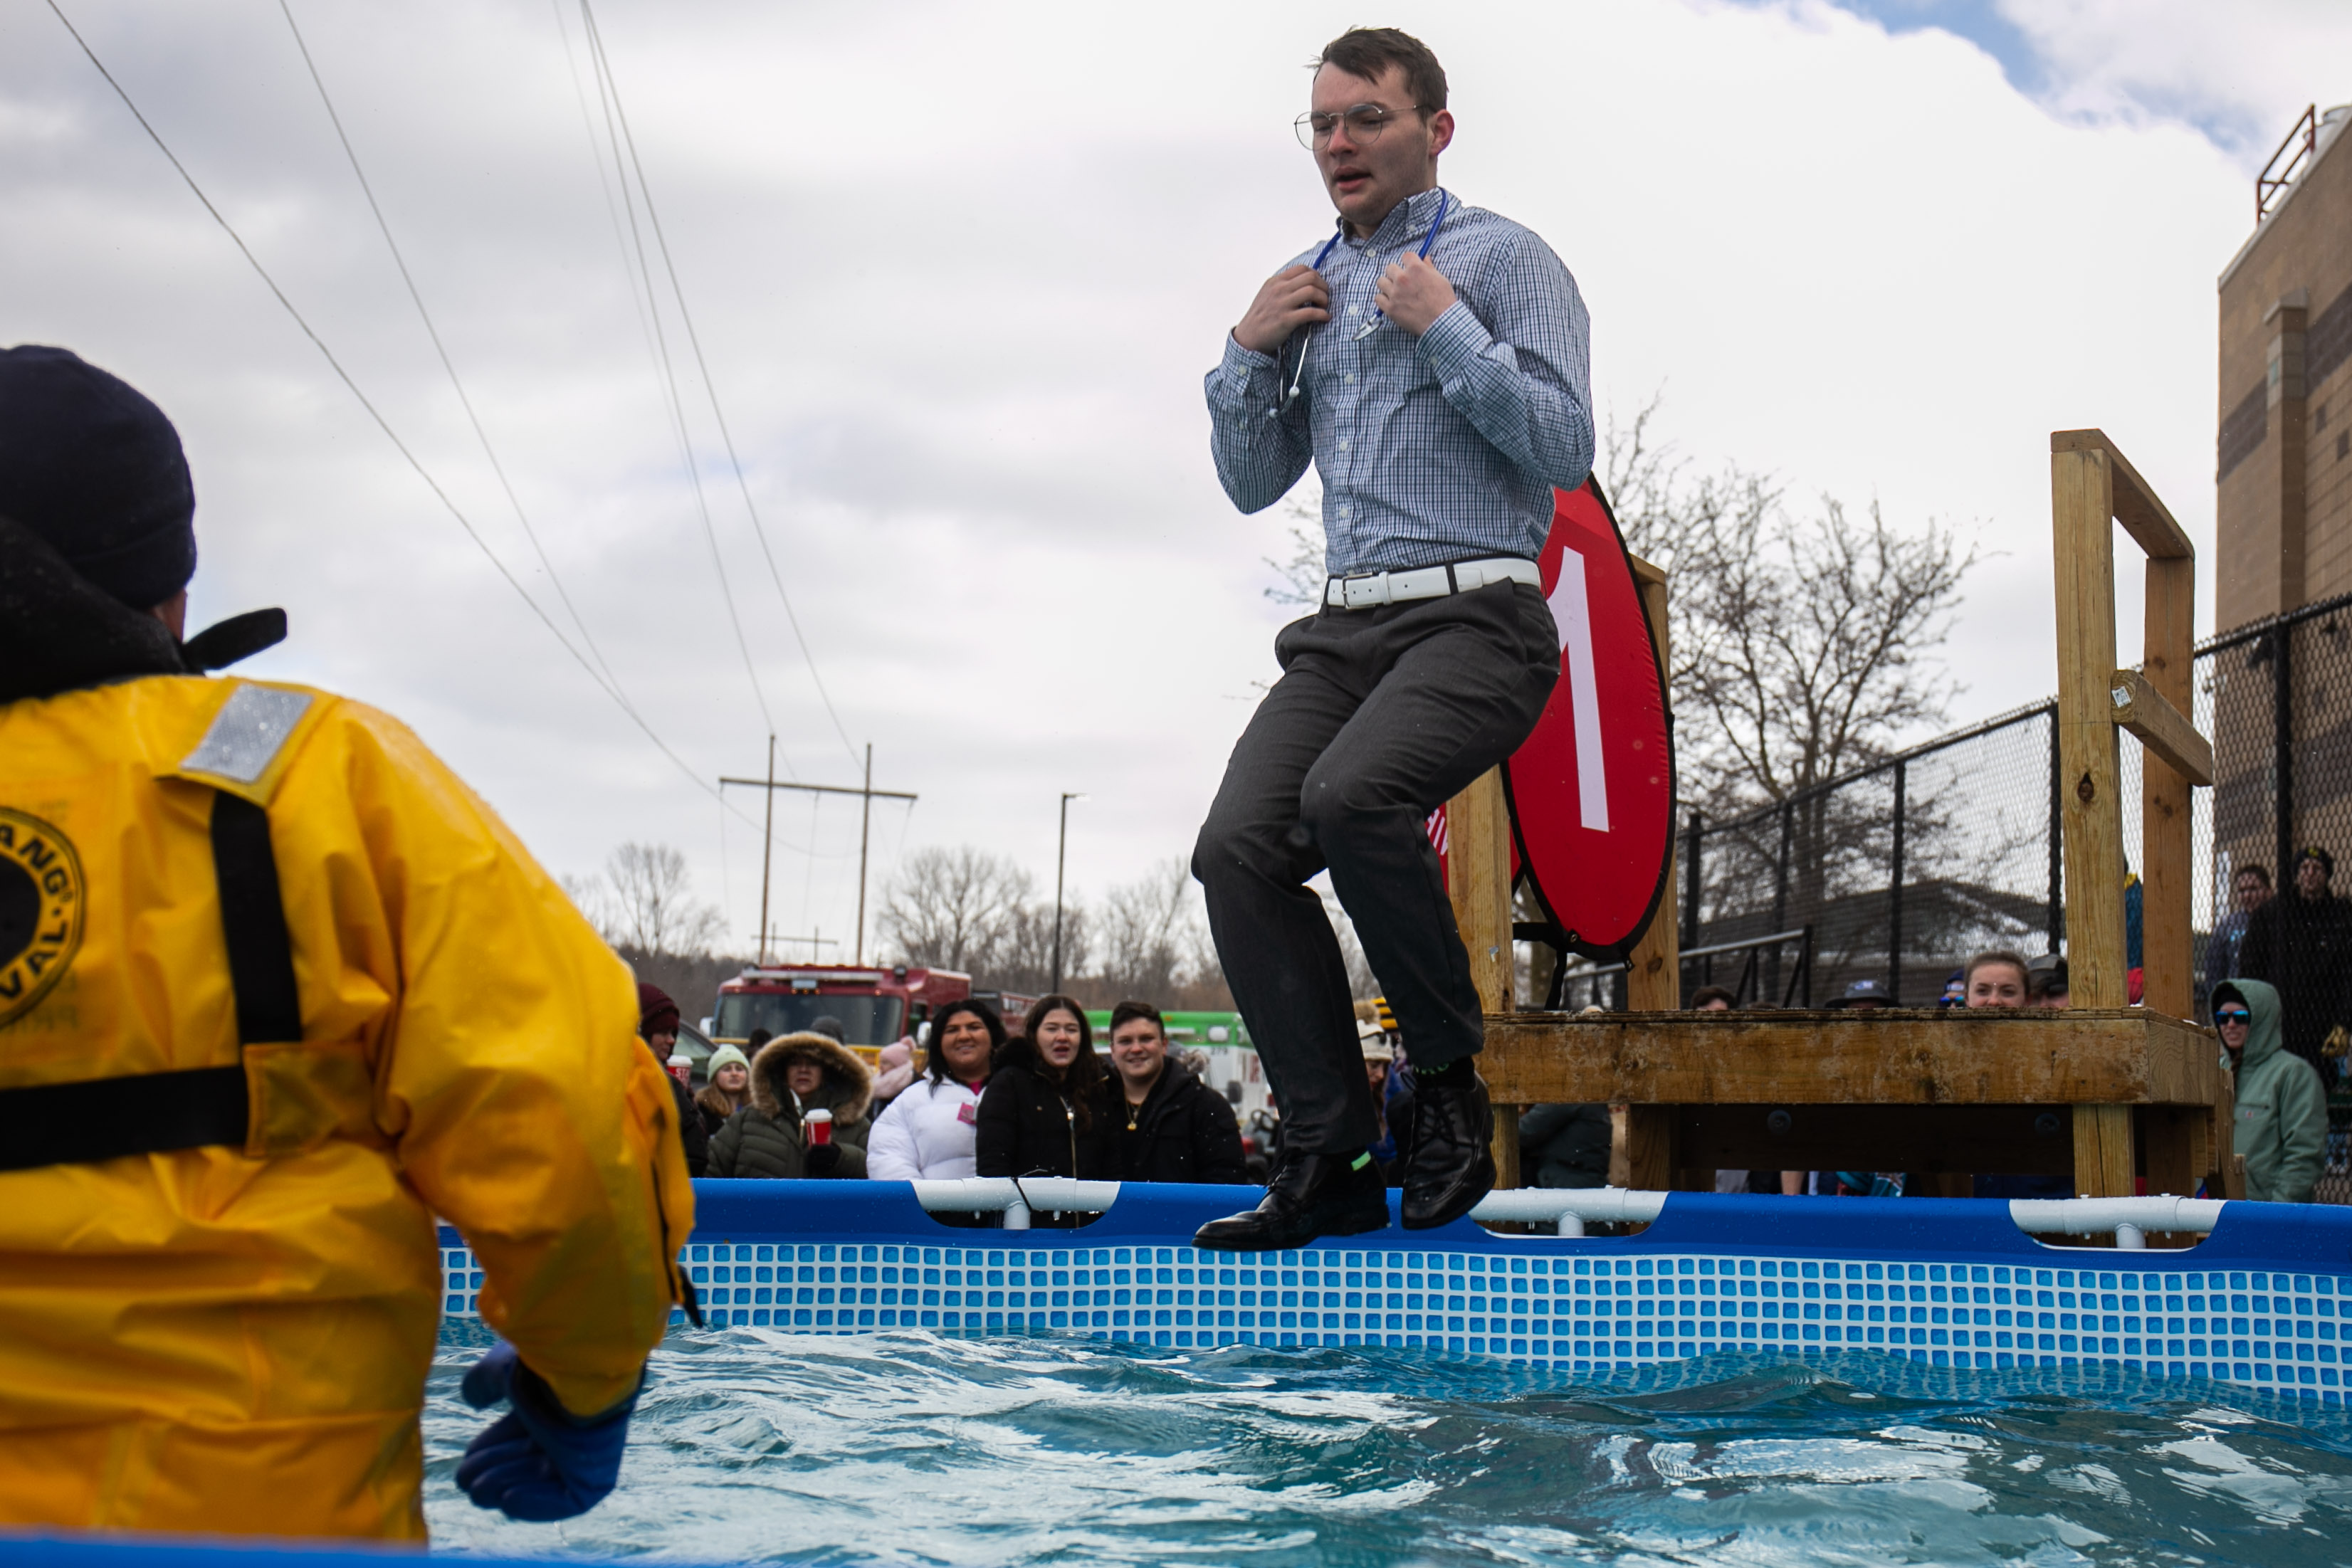 Divers Take On Cold For Grand Rapids Polar Plunge To Support Special